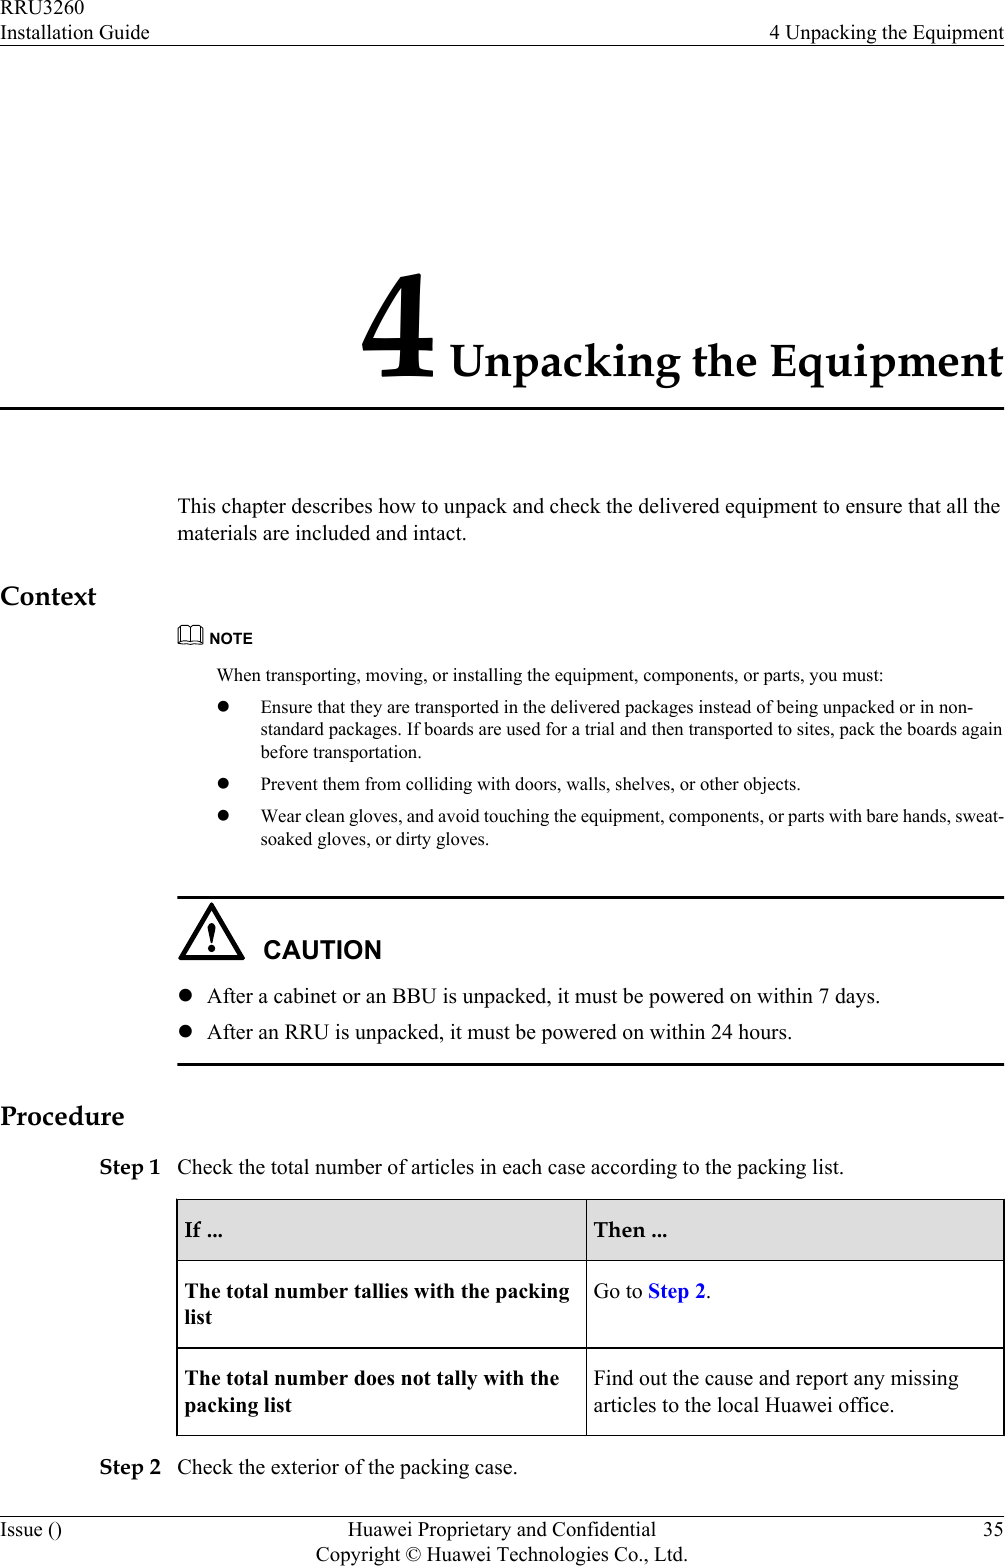 4 Unpacking the EquipmentThis chapter describes how to unpack and check the delivered equipment to ensure that all thematerials are included and intact.ContextNOTEWhen transporting, moving, or installing the equipment, components, or parts, you must:lEnsure that they are transported in the delivered packages instead of being unpacked or in non-standard packages. If boards are used for a trial and then transported to sites, pack the boards againbefore transportation.lPrevent them from colliding with doors, walls, shelves, or other objects.lWear clean gloves, and avoid touching the equipment, components, or parts with bare hands, sweat-soaked gloves, or dirty gloves.CAUTIONlAfter a cabinet or an BBU is unpacked, it must be powered on within 7 days.lAfter an RRU is unpacked, it must be powered on within 24 hours.ProcedureStep 1 Check the total number of articles in each case according to the packing list.If ... Then ...The total number tallies with the packinglistGo to Step 2.The total number does not tally with thepacking listFind out the cause and report any missingarticles to the local Huawei office.Step 2 Check the exterior of the packing case.RRU3260Installation Guide 4 Unpacking the EquipmentIssue () Huawei Proprietary and ConfidentialCopyright © Huawei Technologies Co., Ltd.35